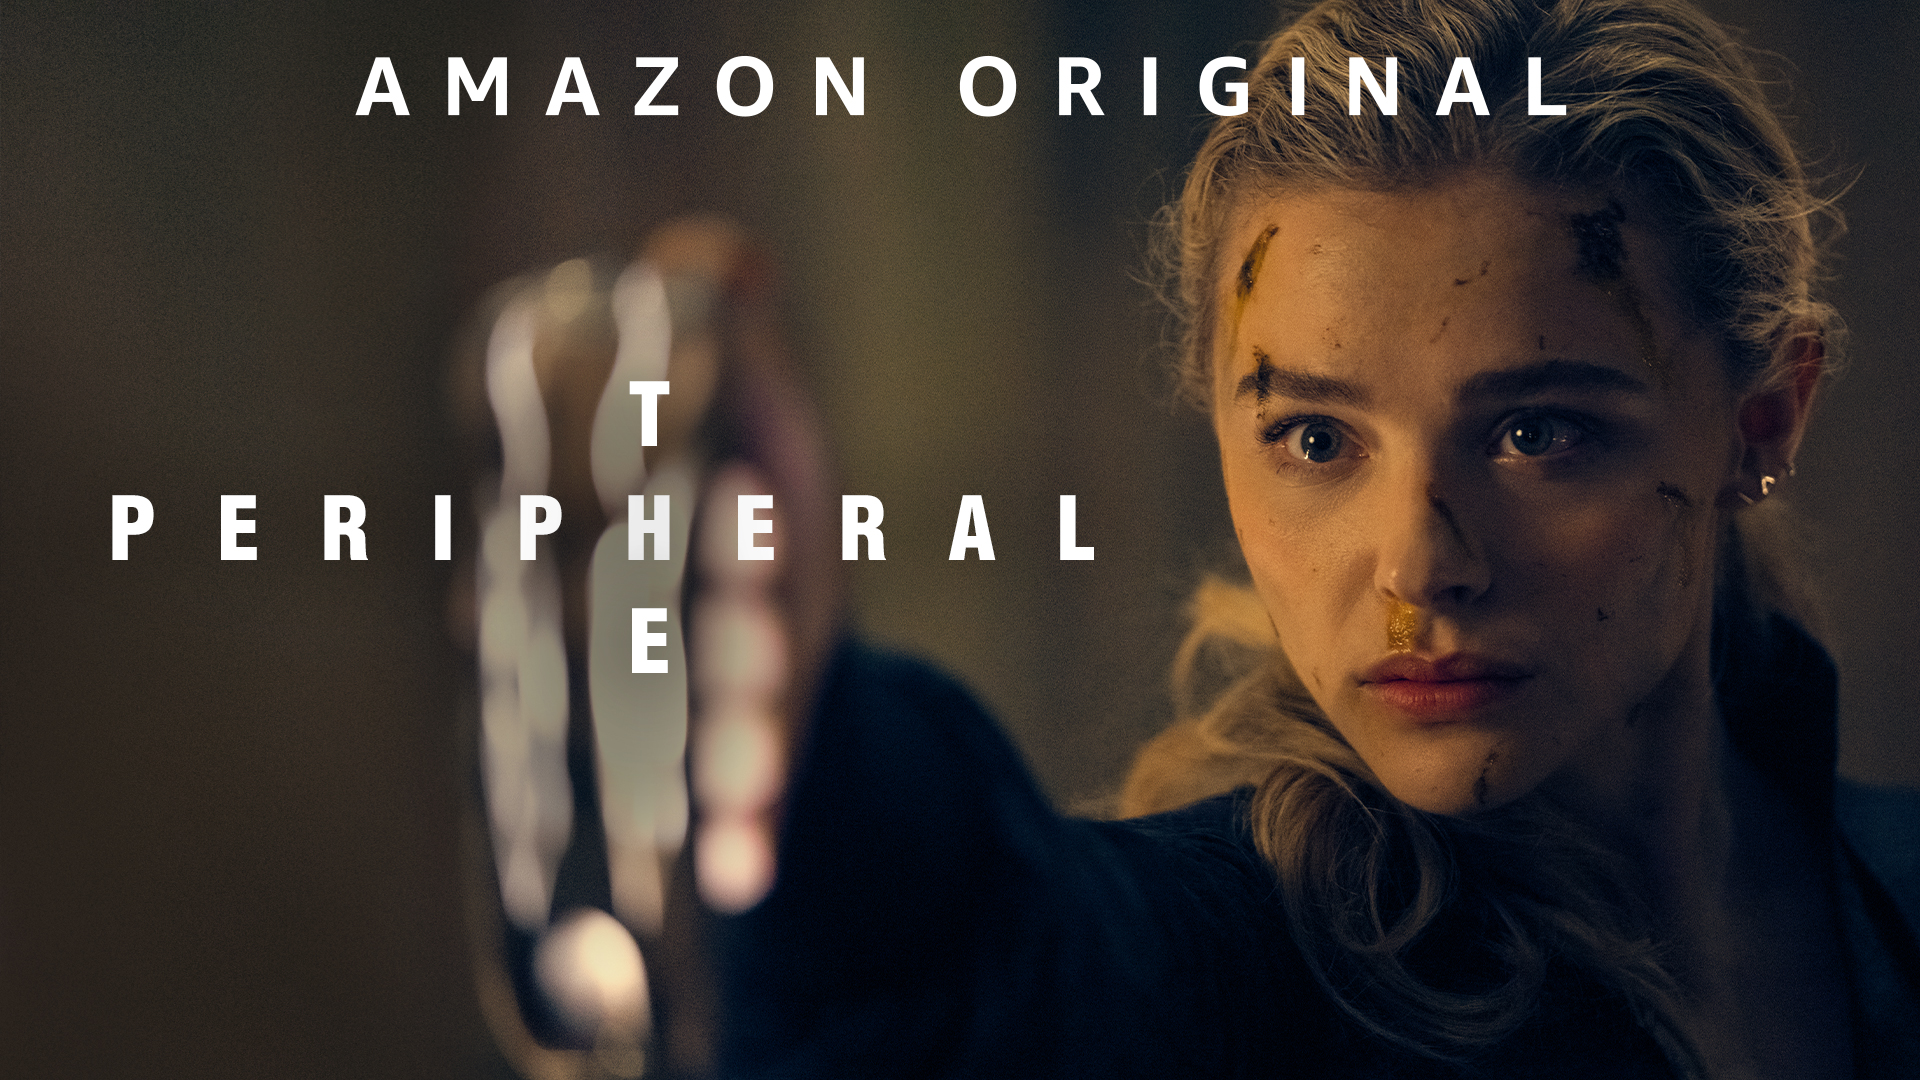 A still from the tv show ‘The Peripheral’ showing the dirty face of actress Chloë Grace Moretz as character Flynne Fisher